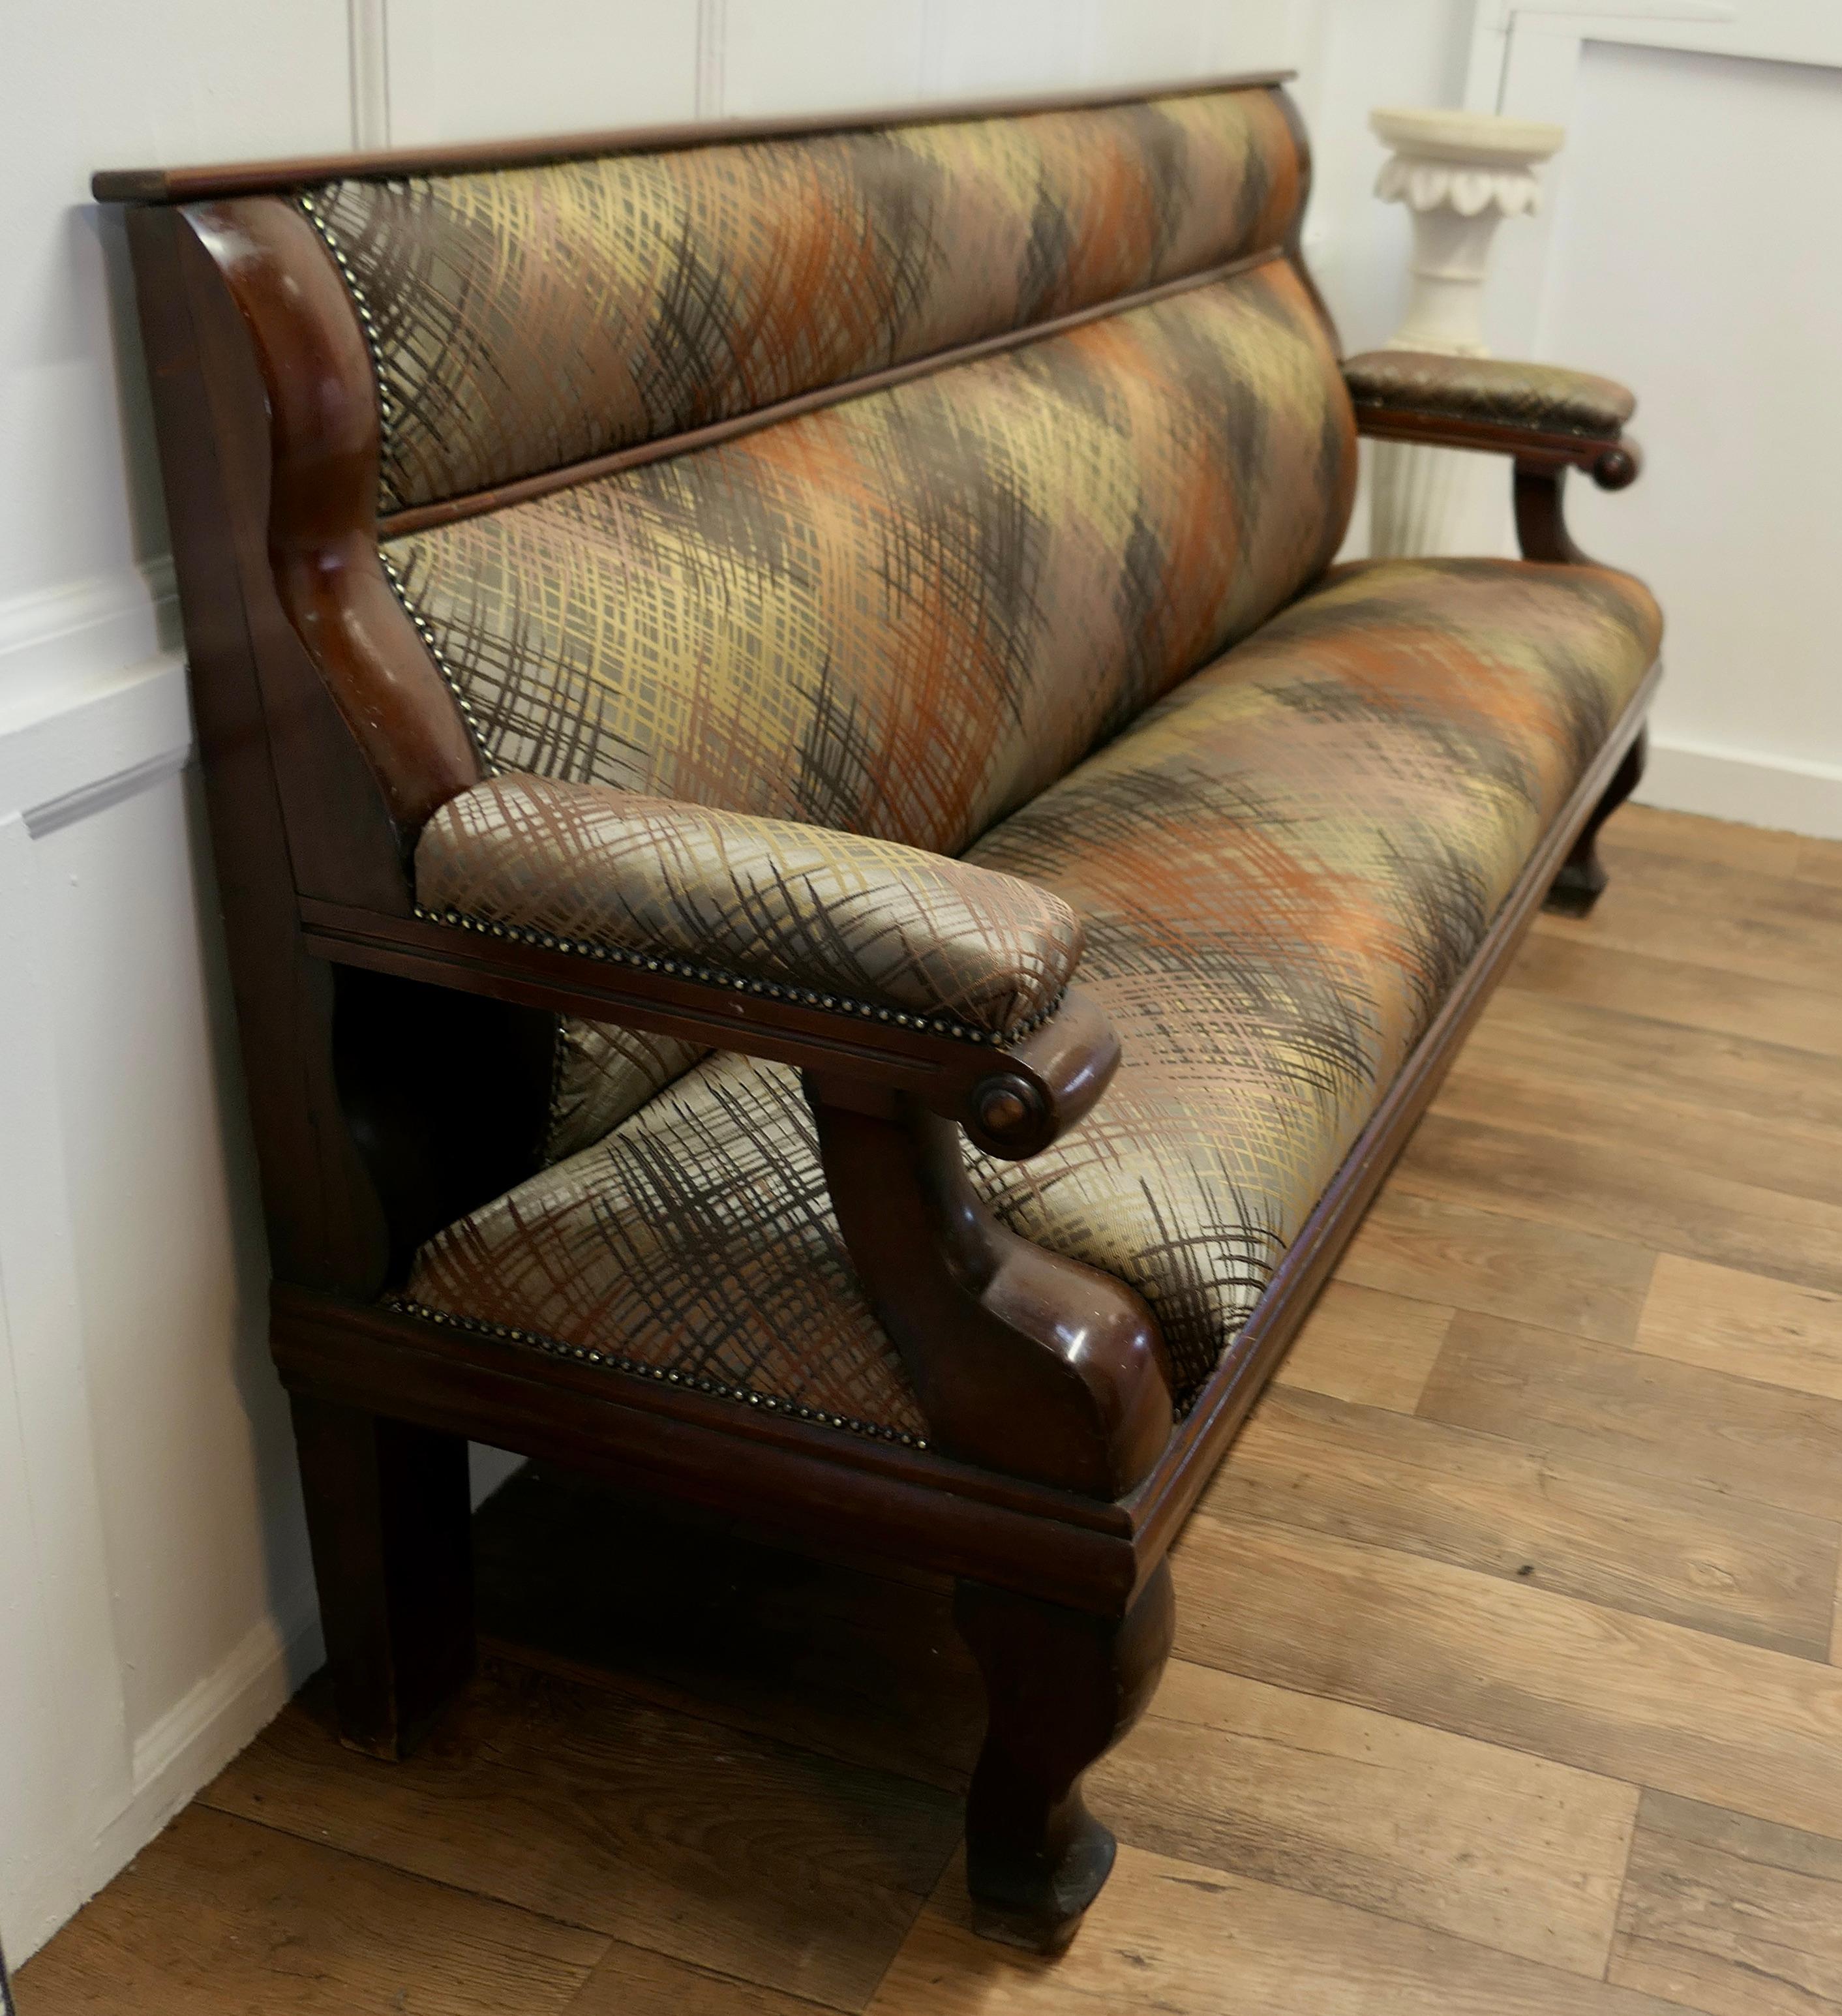 Walnut Long Waiting Room Seat or Hall Bench This Is a Very Sturdy and Heavy Piece  For Sale